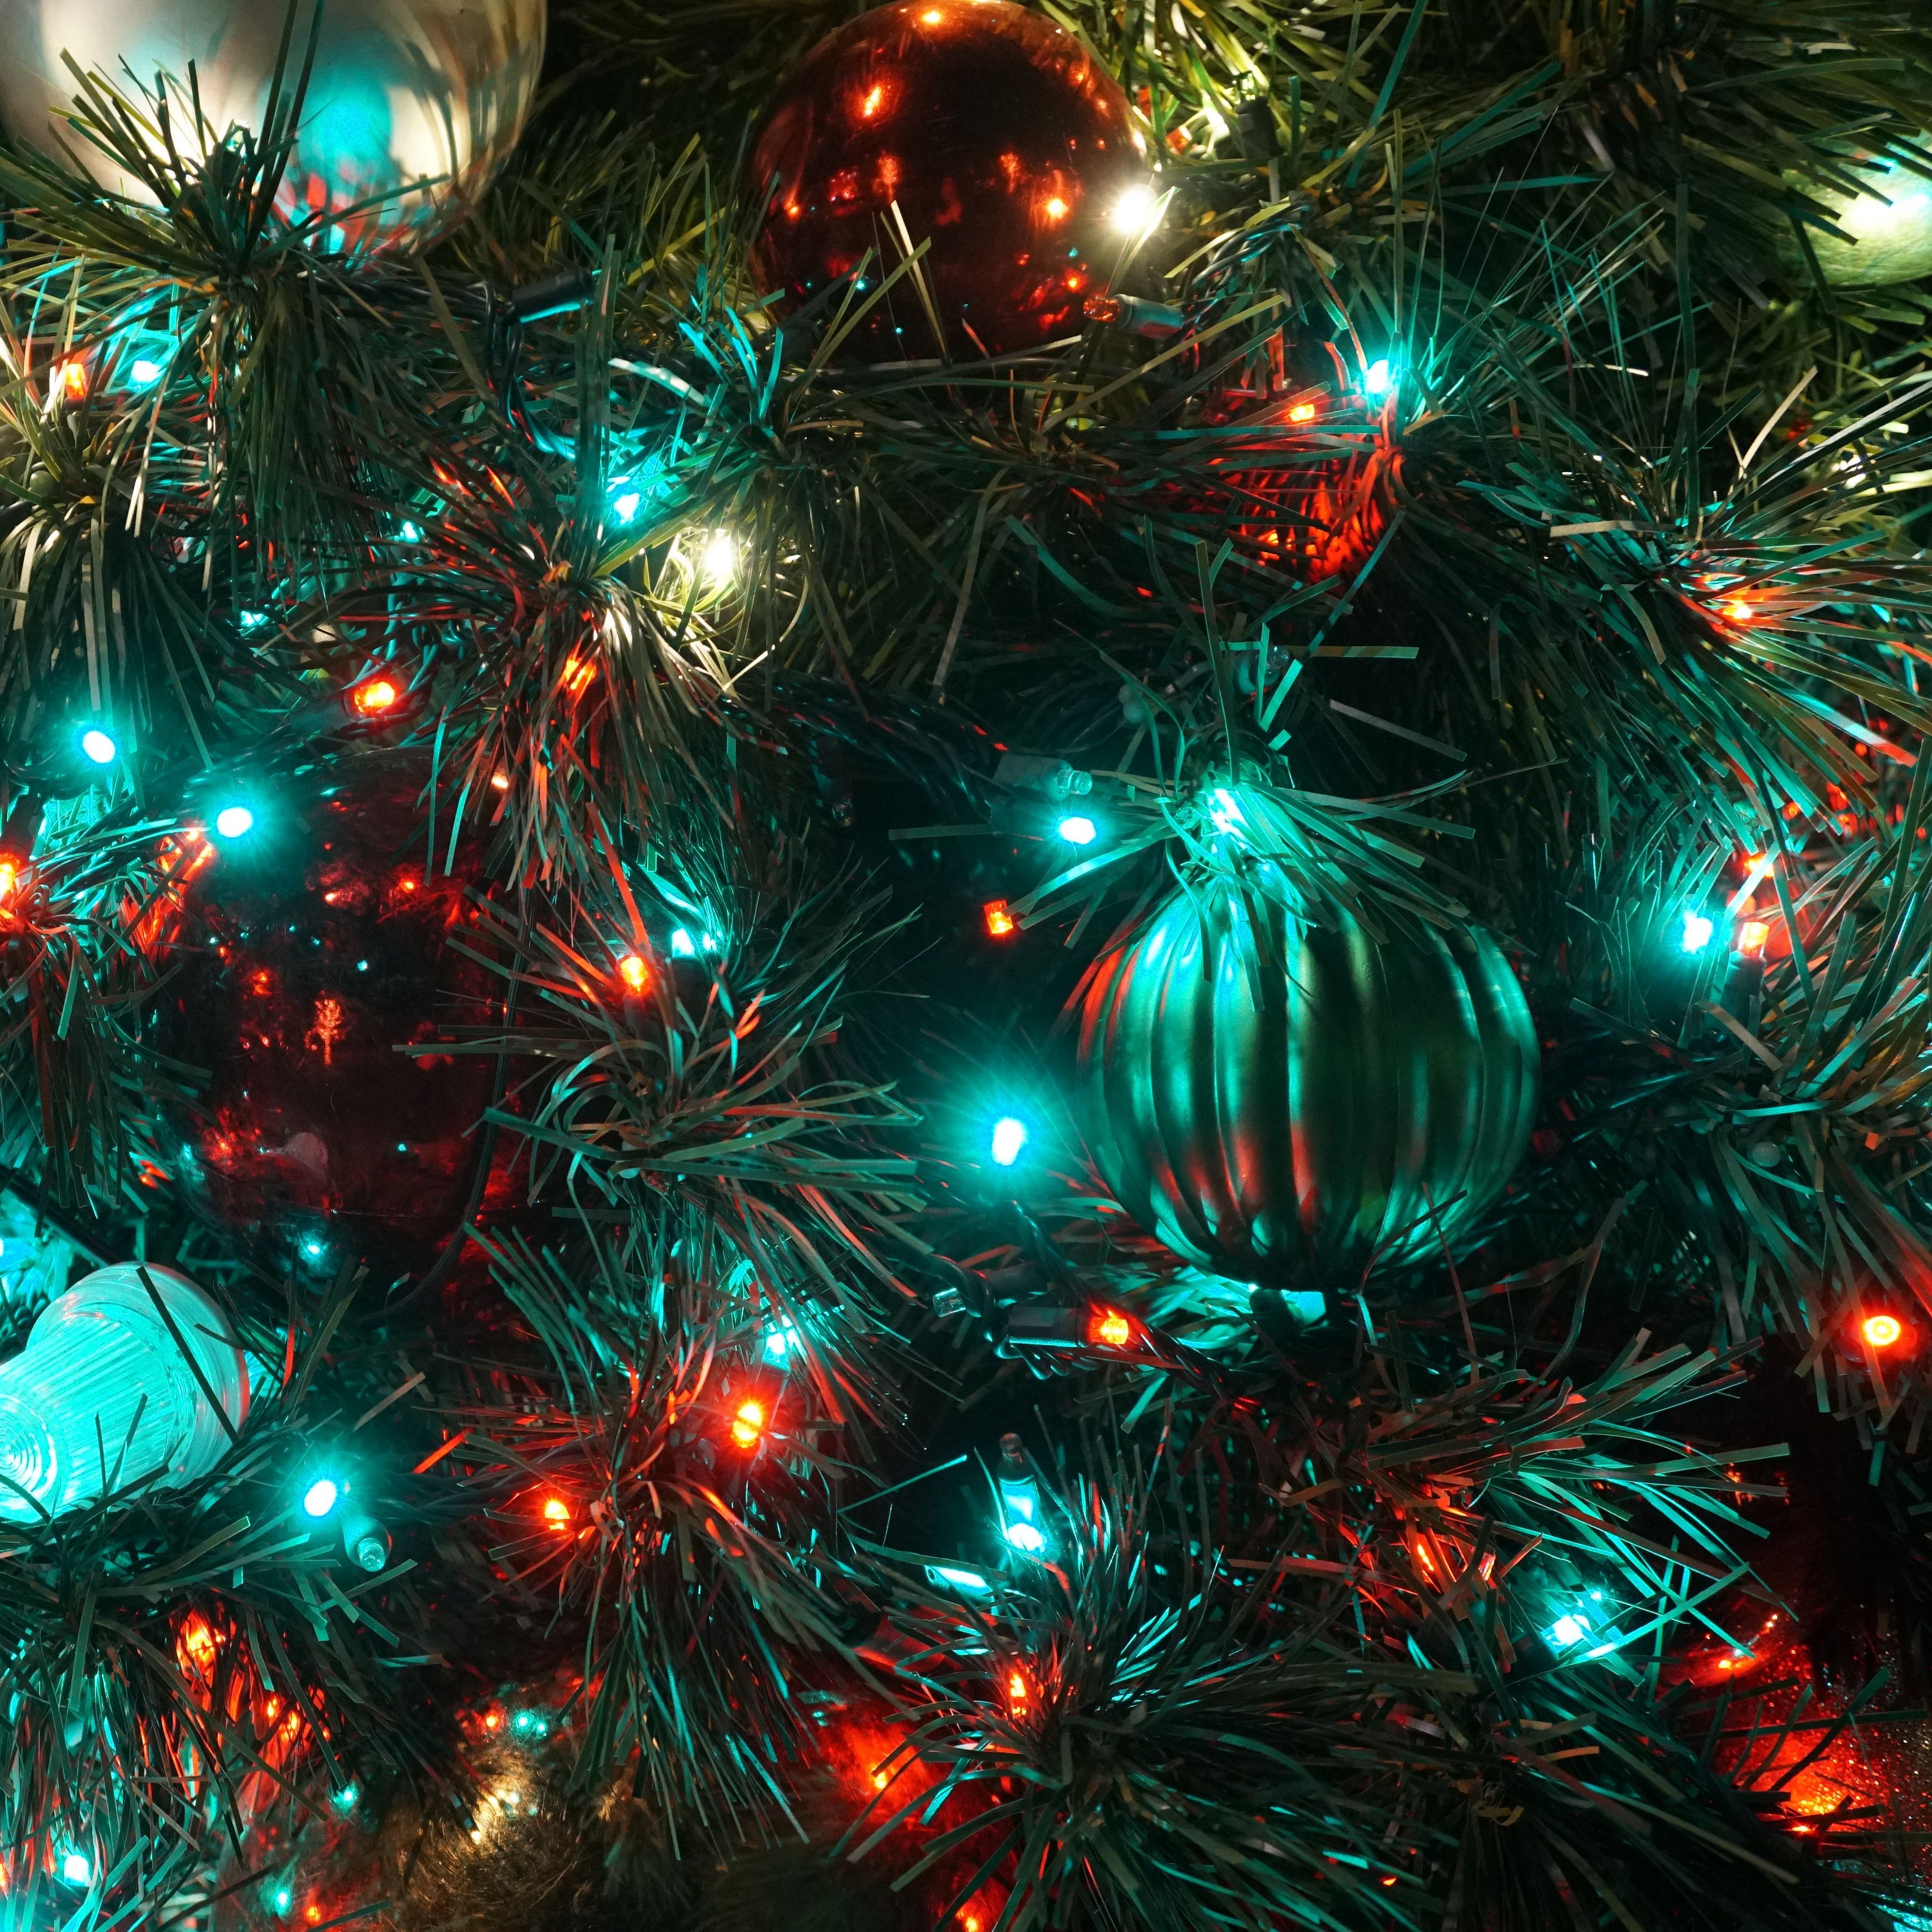 Download wallpaper 3415x3415 christmas toys, garland, light, christmas tree, new year, christmas ipad pro 12.9 retina for parallax HD background